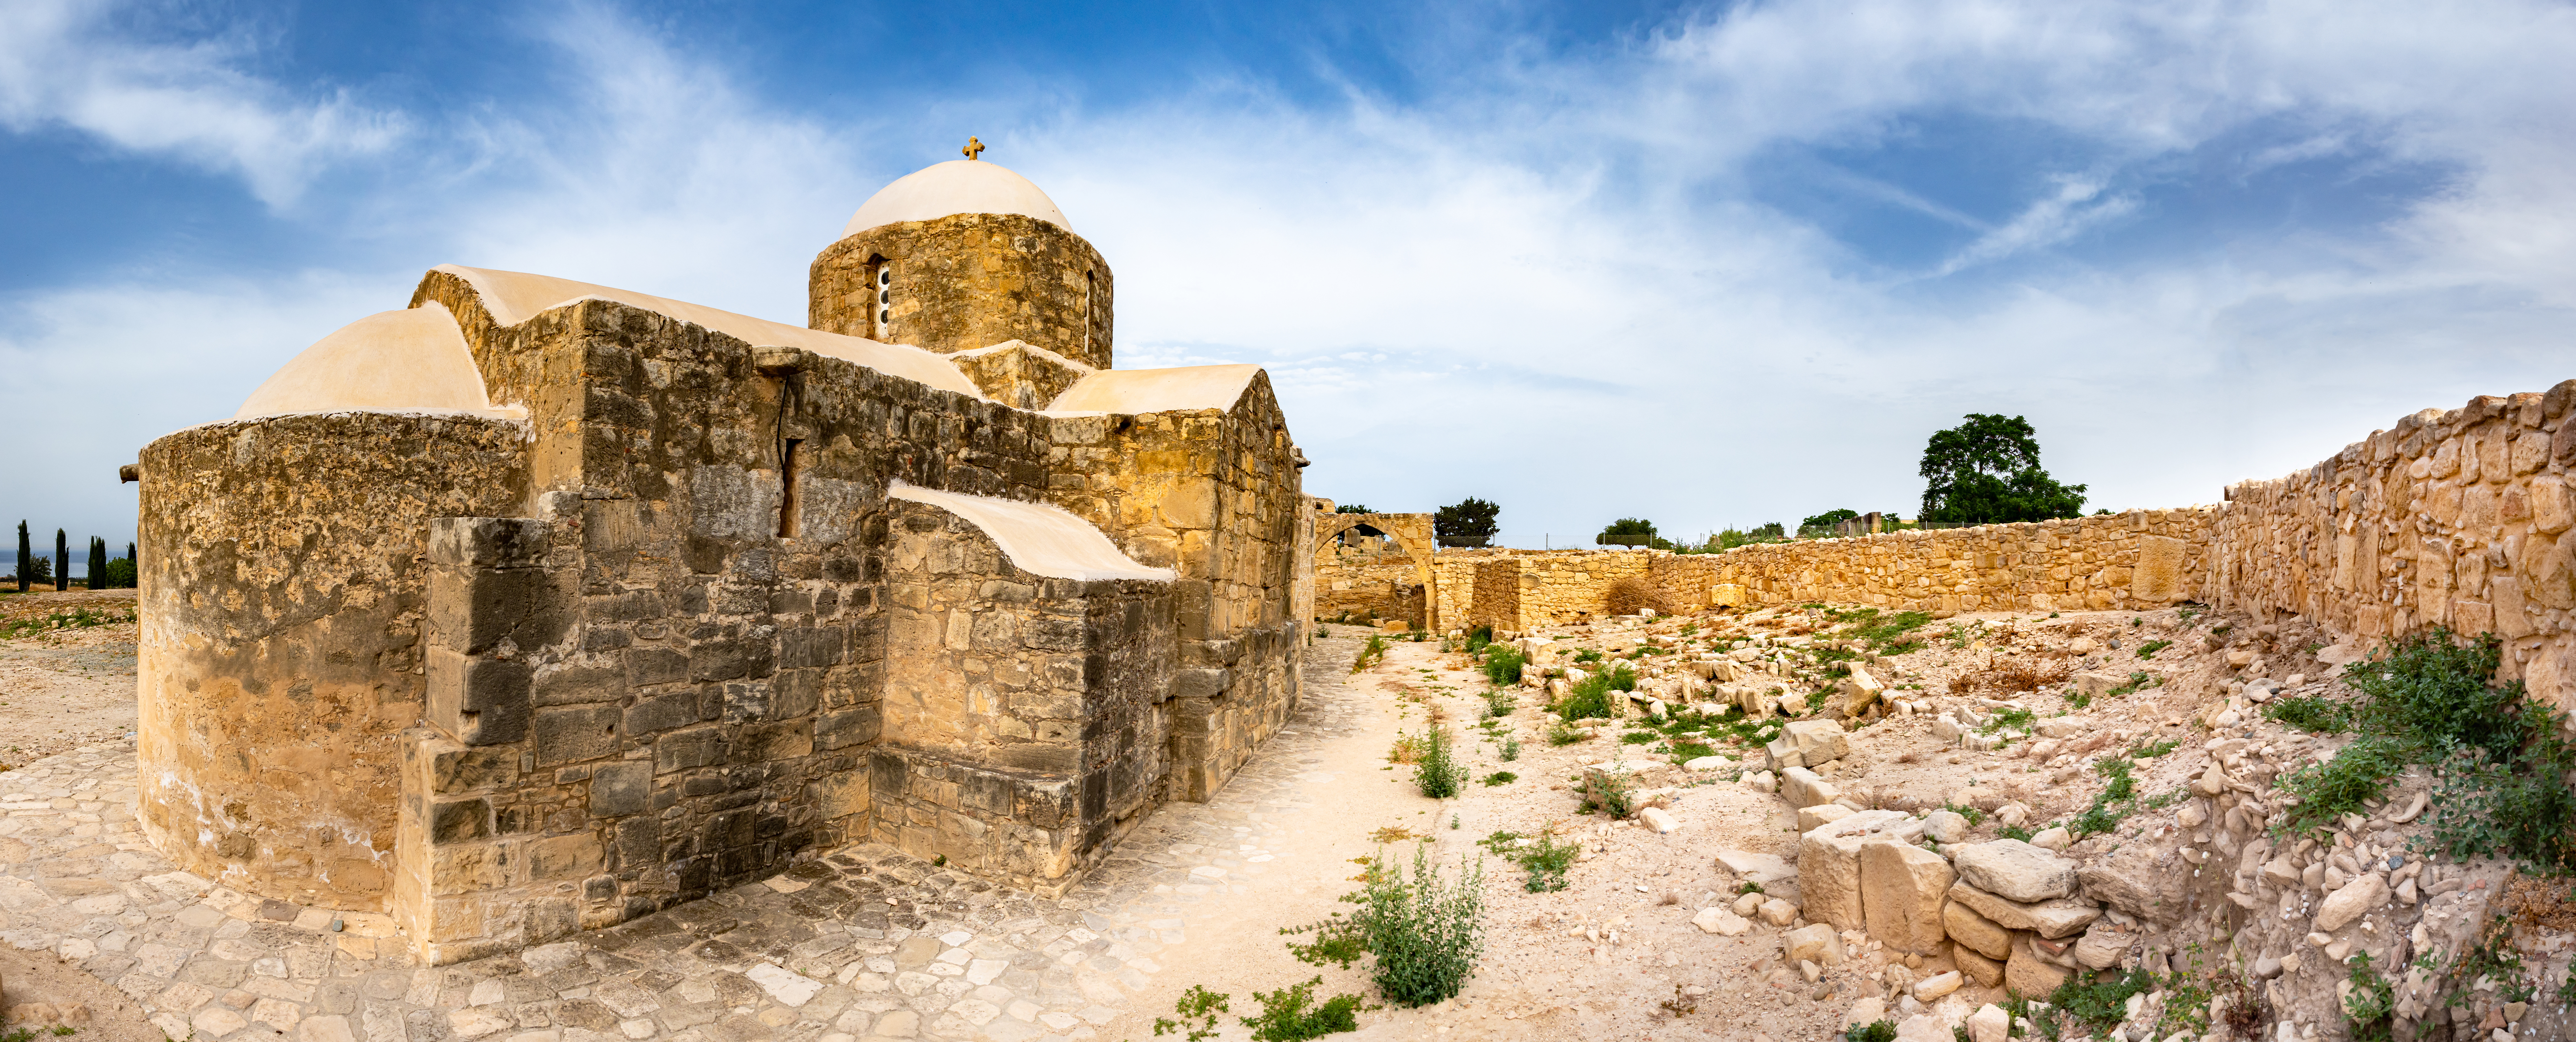 Republic of Cyprus. The Town Of Paphos. Ancient ruins in Paphos. Remains of ancient buildings. Old Christian Church. Panorama Of Cyprus. Attractions of the Mediterranean coast.